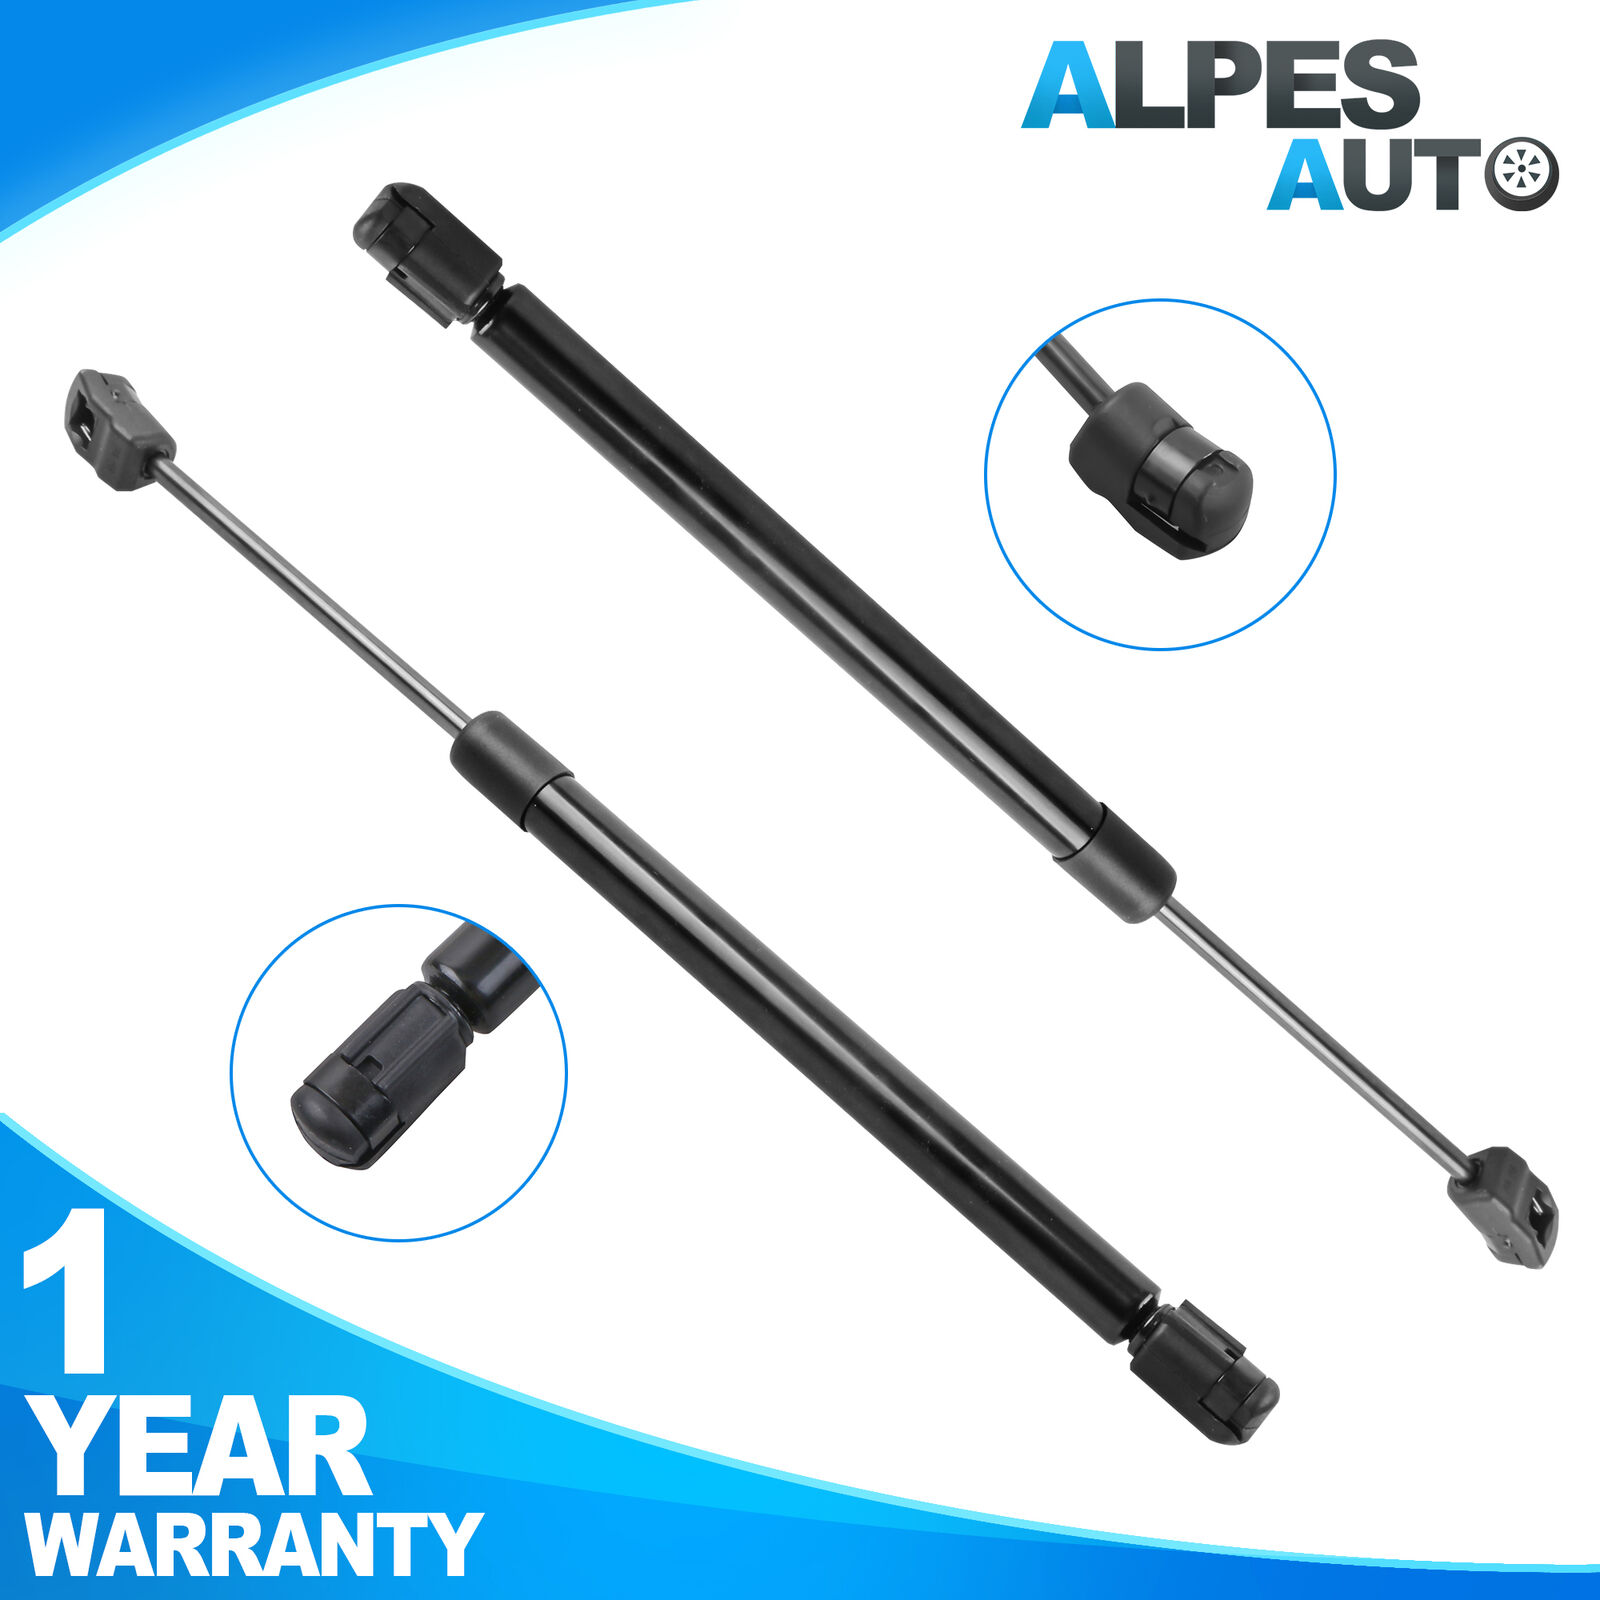 2PCS Front Hood Lift Supports Gas Spring Shock Struts For 1995-04 Ford F150 F250